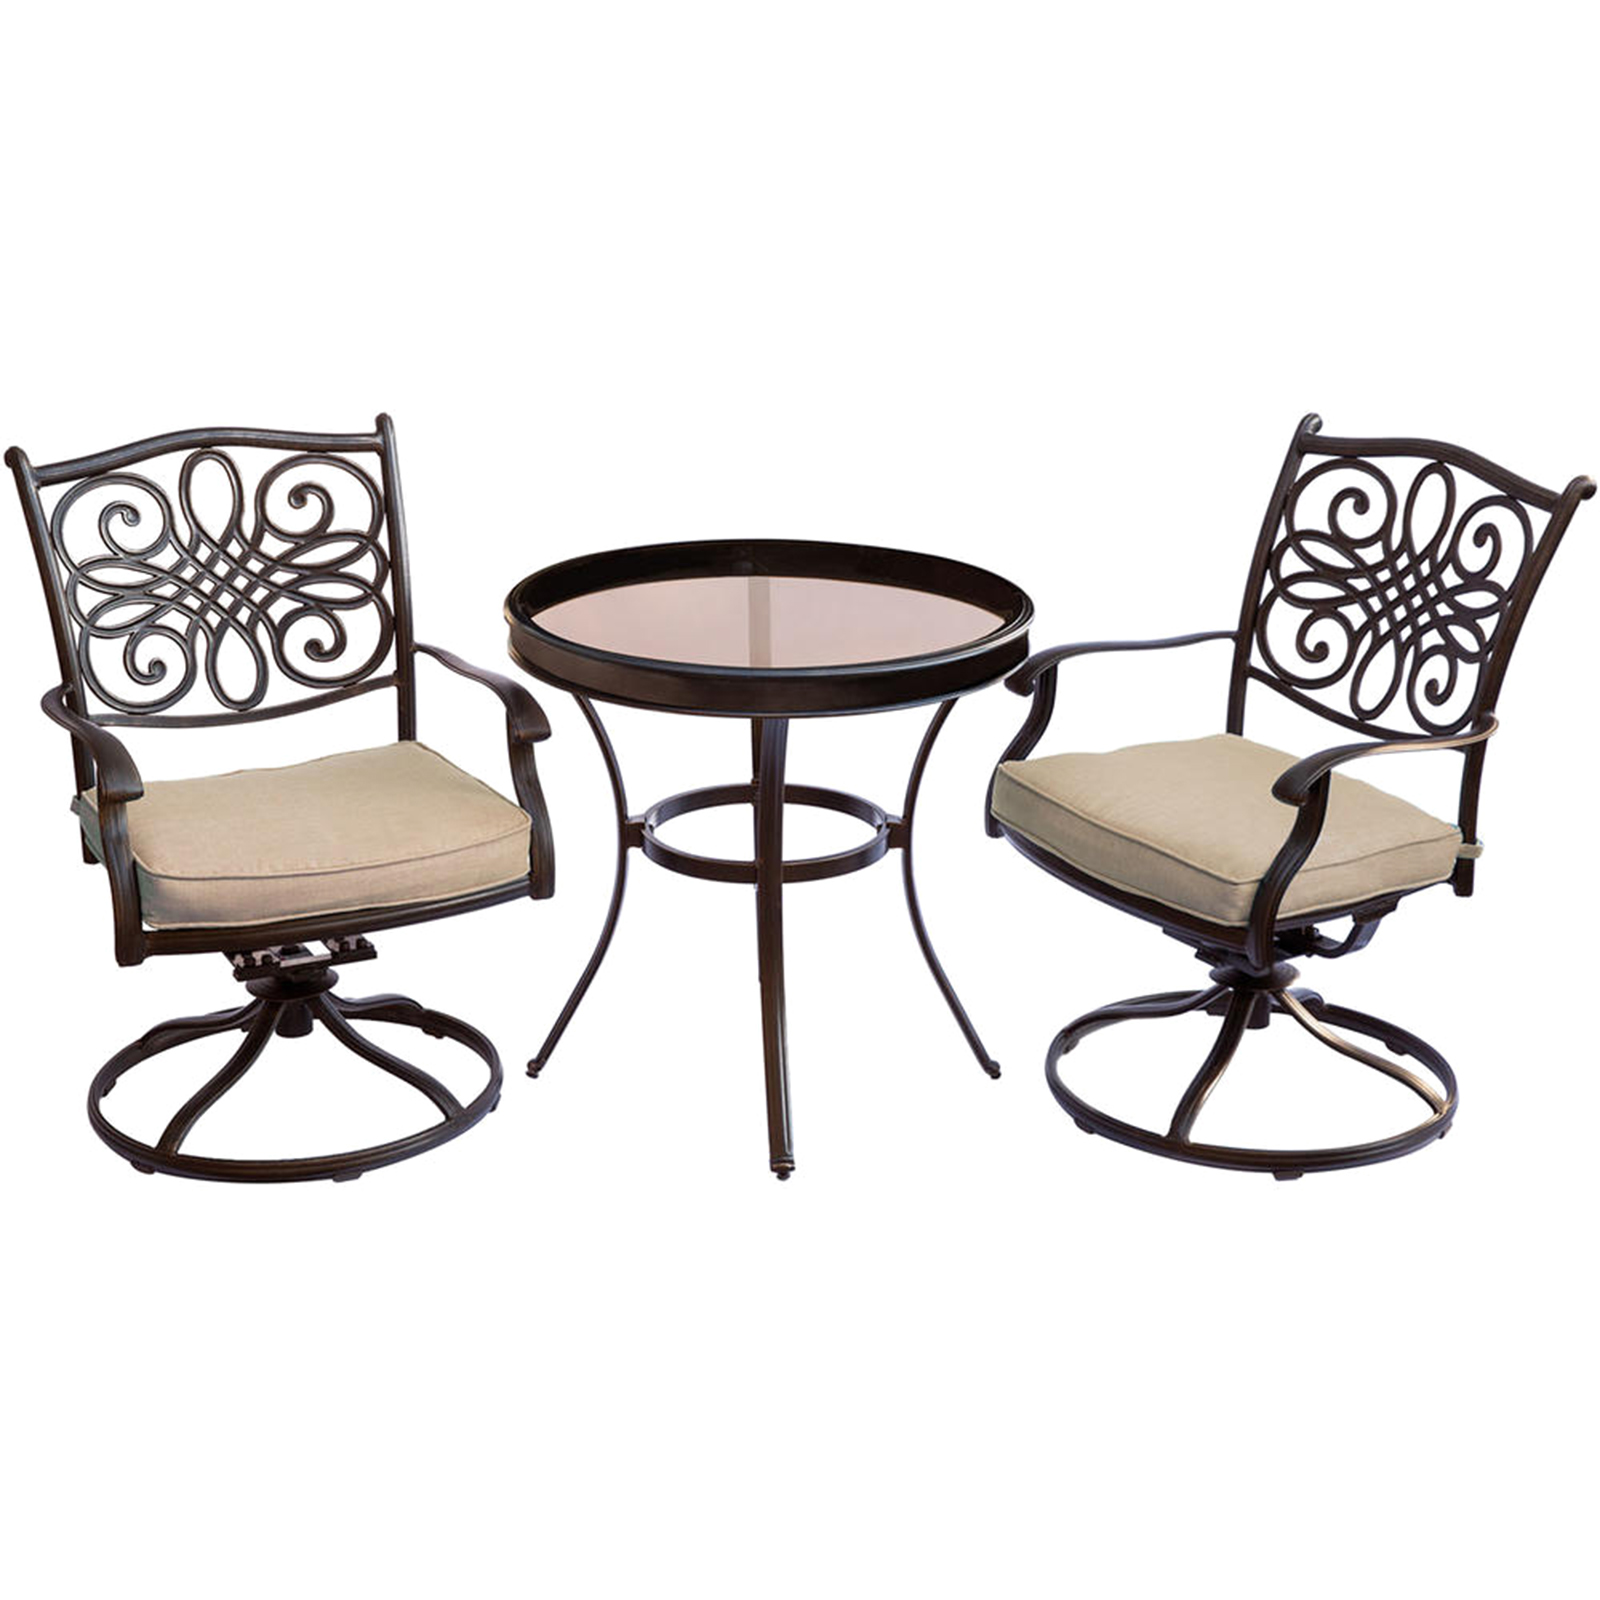 Hanover Traditions 3pc. Bistro Set with Cushions - Tan